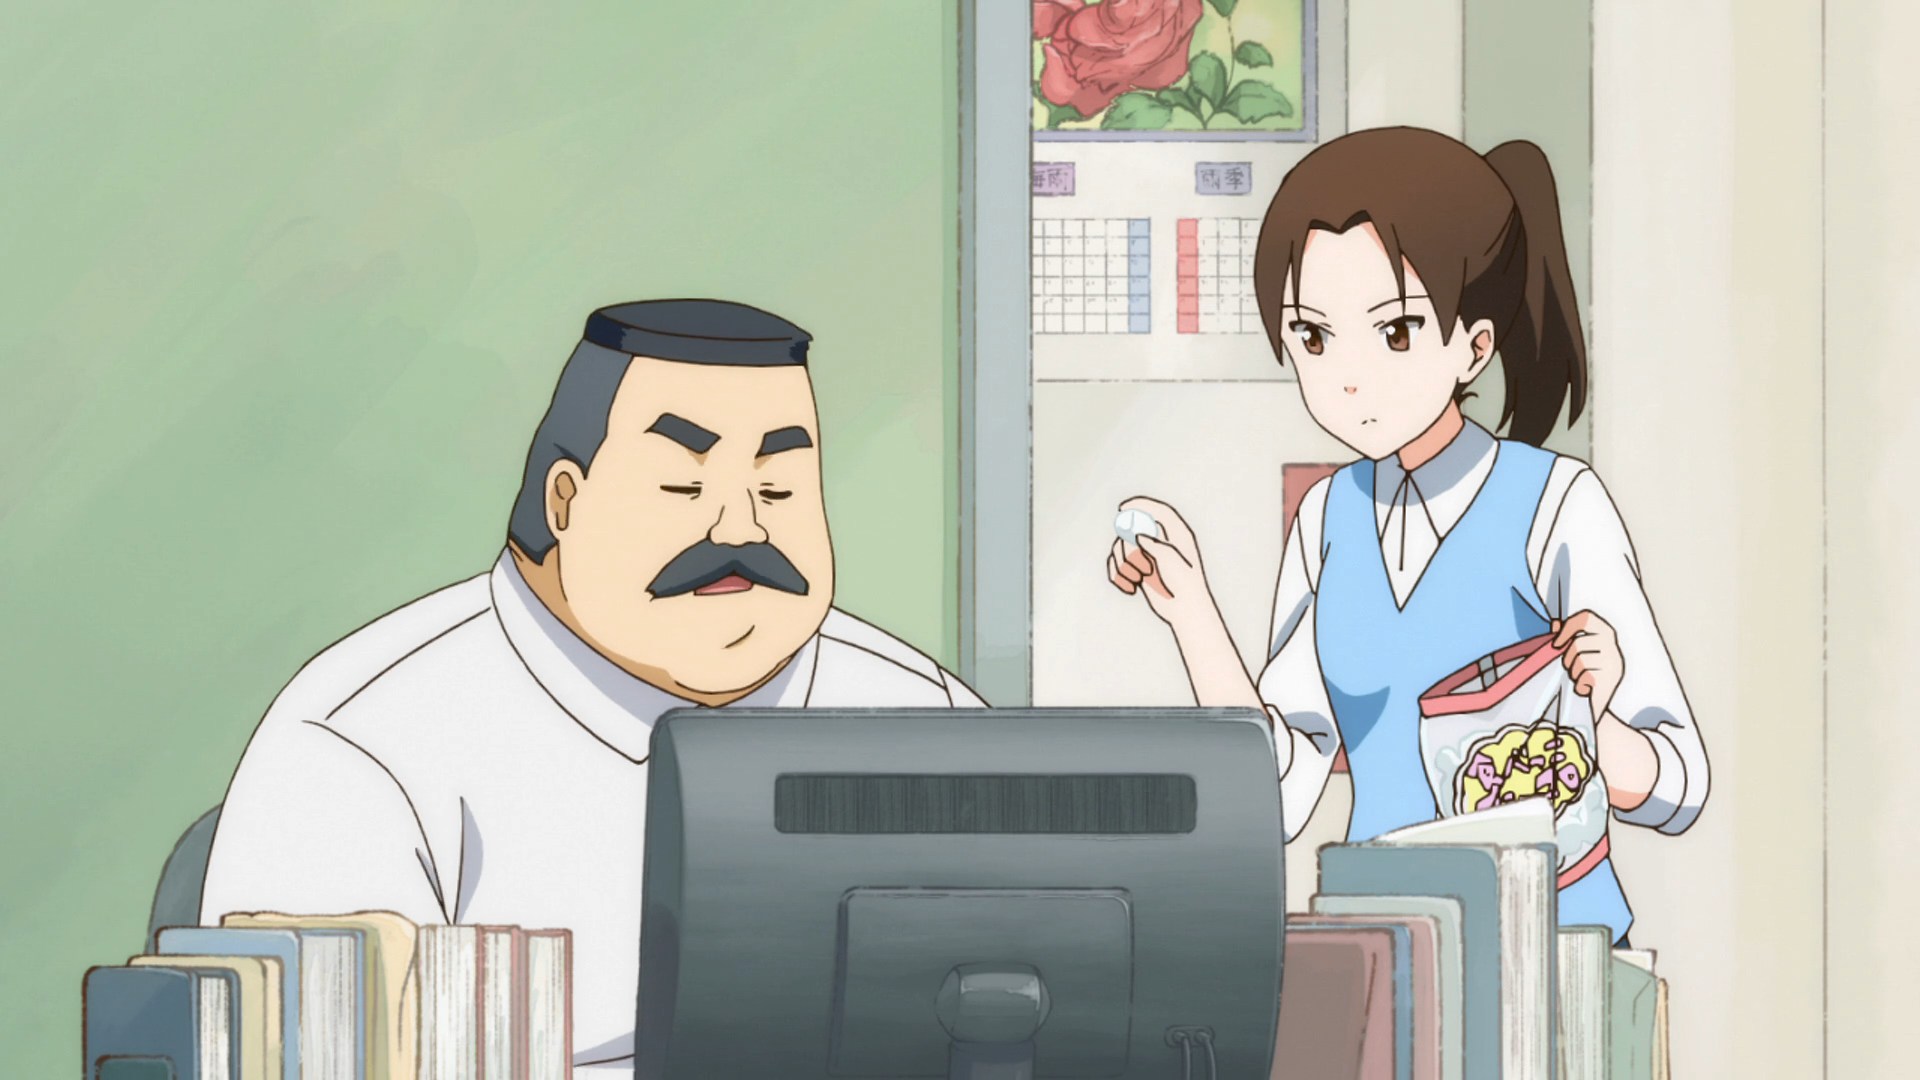 Ojisan and Marshmallow: Hige-san and Marshmallow | Anime-Planet